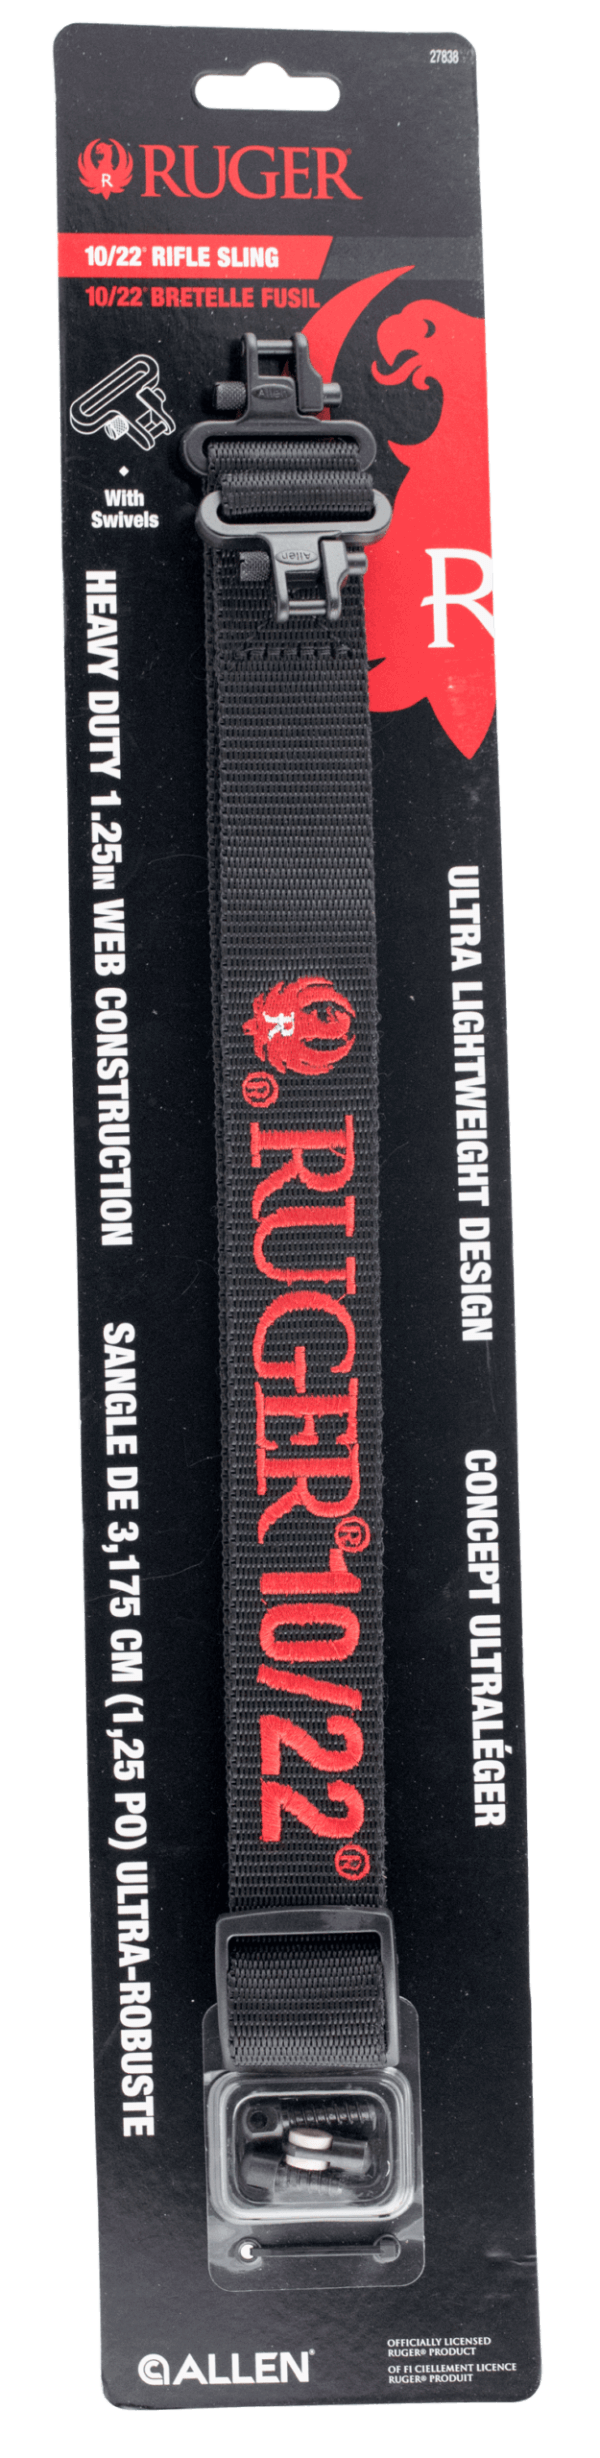 Ruger 27838 Rifle Sling 1.25″ W x 20.15″ L Adjustable Black Webbing with Red Logo & 300 lb Tested Swivels for Ruger 10/22 Rifle